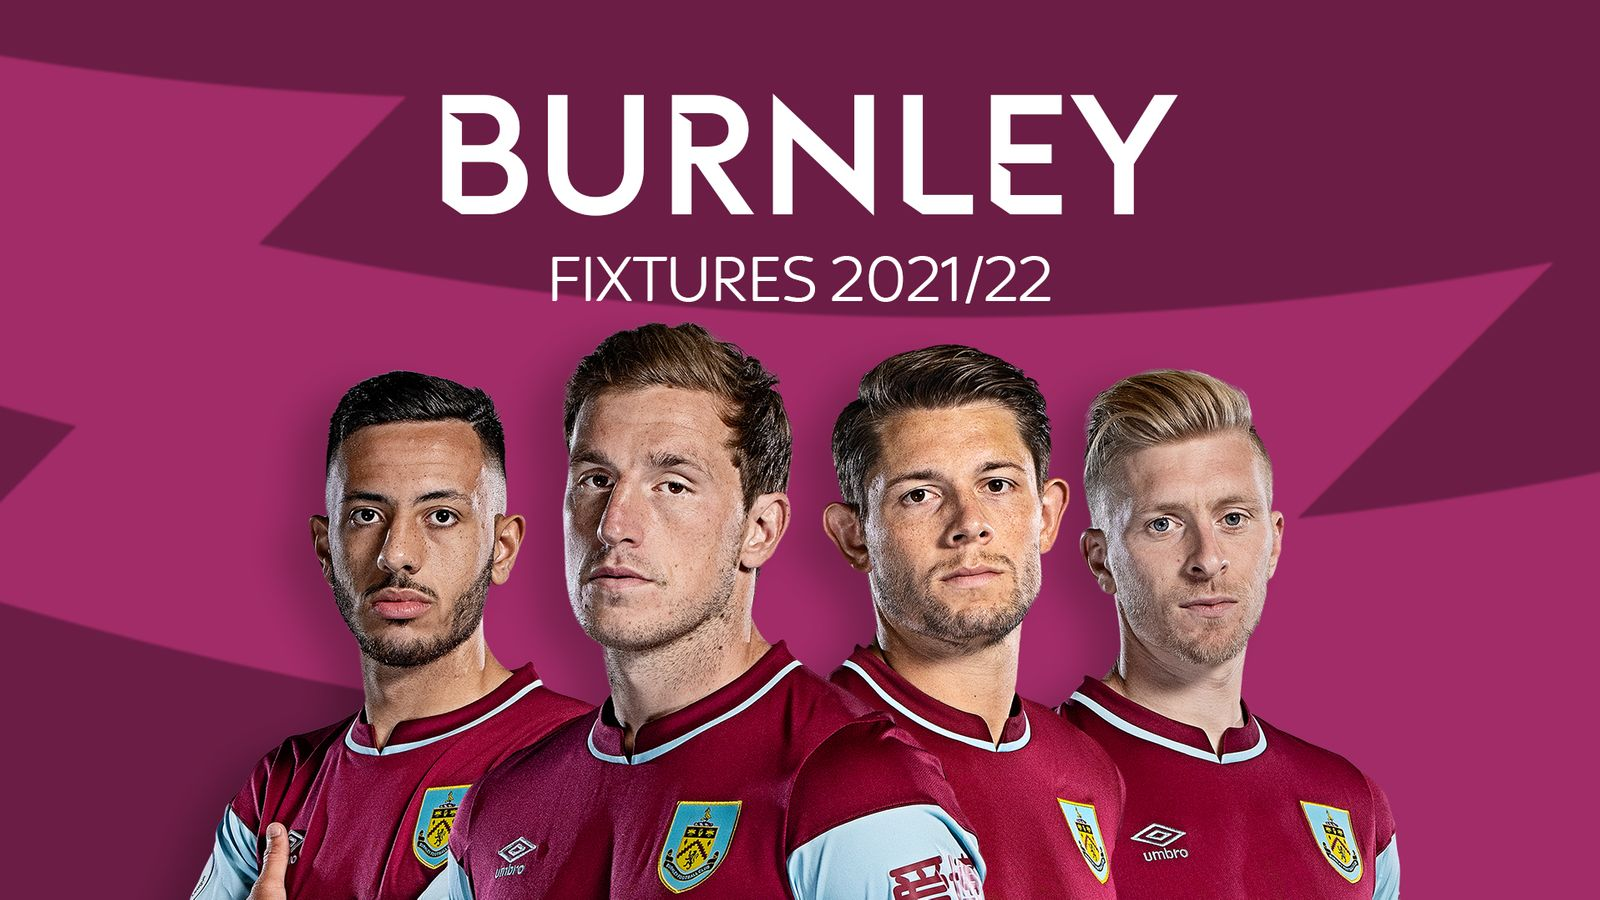 Burnley Premier League 2021-22: Fixtures and Match Schedules in Full